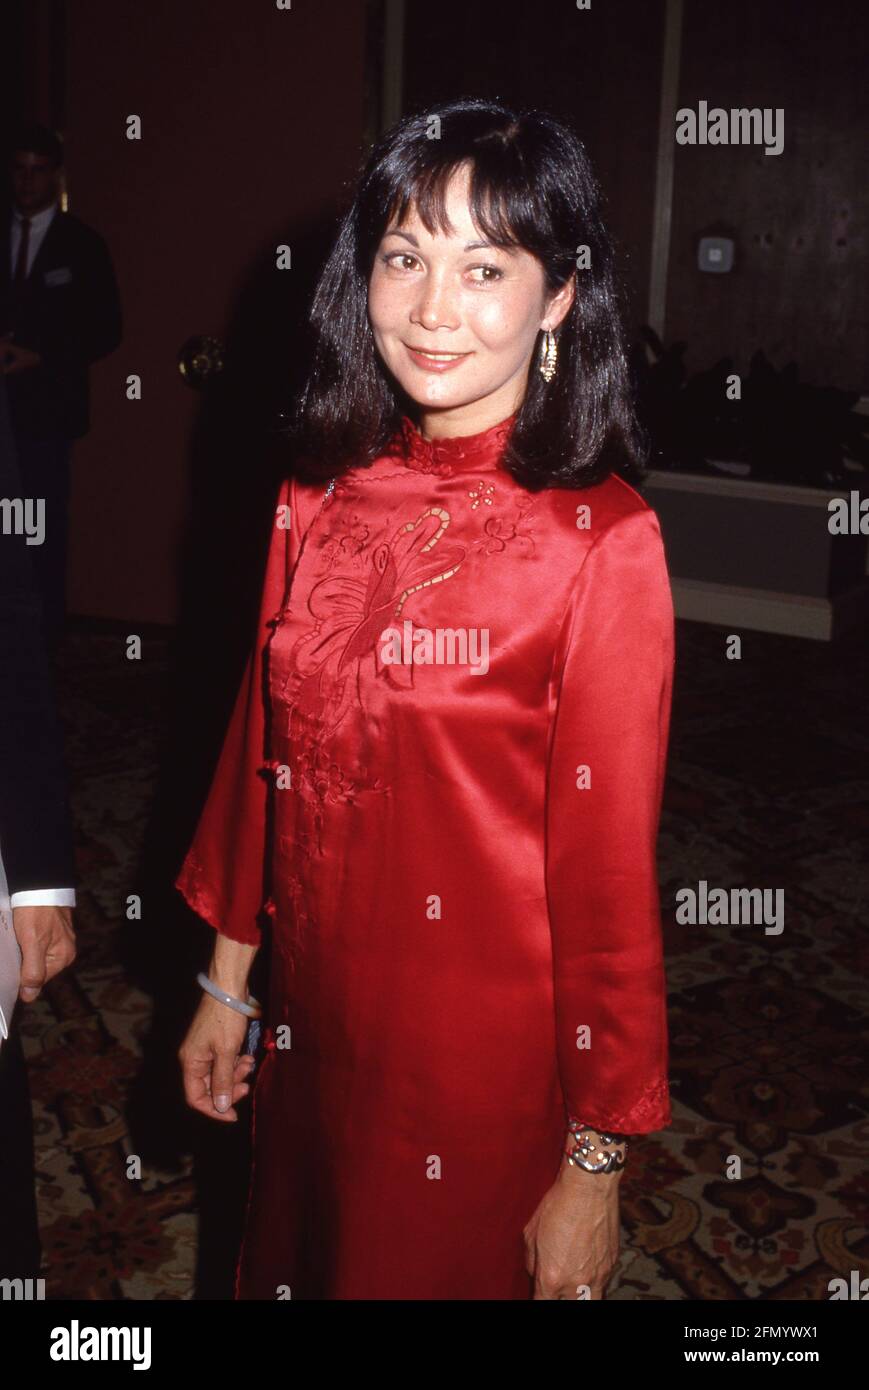 HOLLYWOOD, CA - MARCH 18: Actress Nancy Kwan attends the First Annual Association of Asian/Pacific American Artists' (AAPAA) Media Awards on March 18, 1985 at The Palace in Hollywood, California.  Credit: Ralph Dominguez/MediaPunch Stock Photo